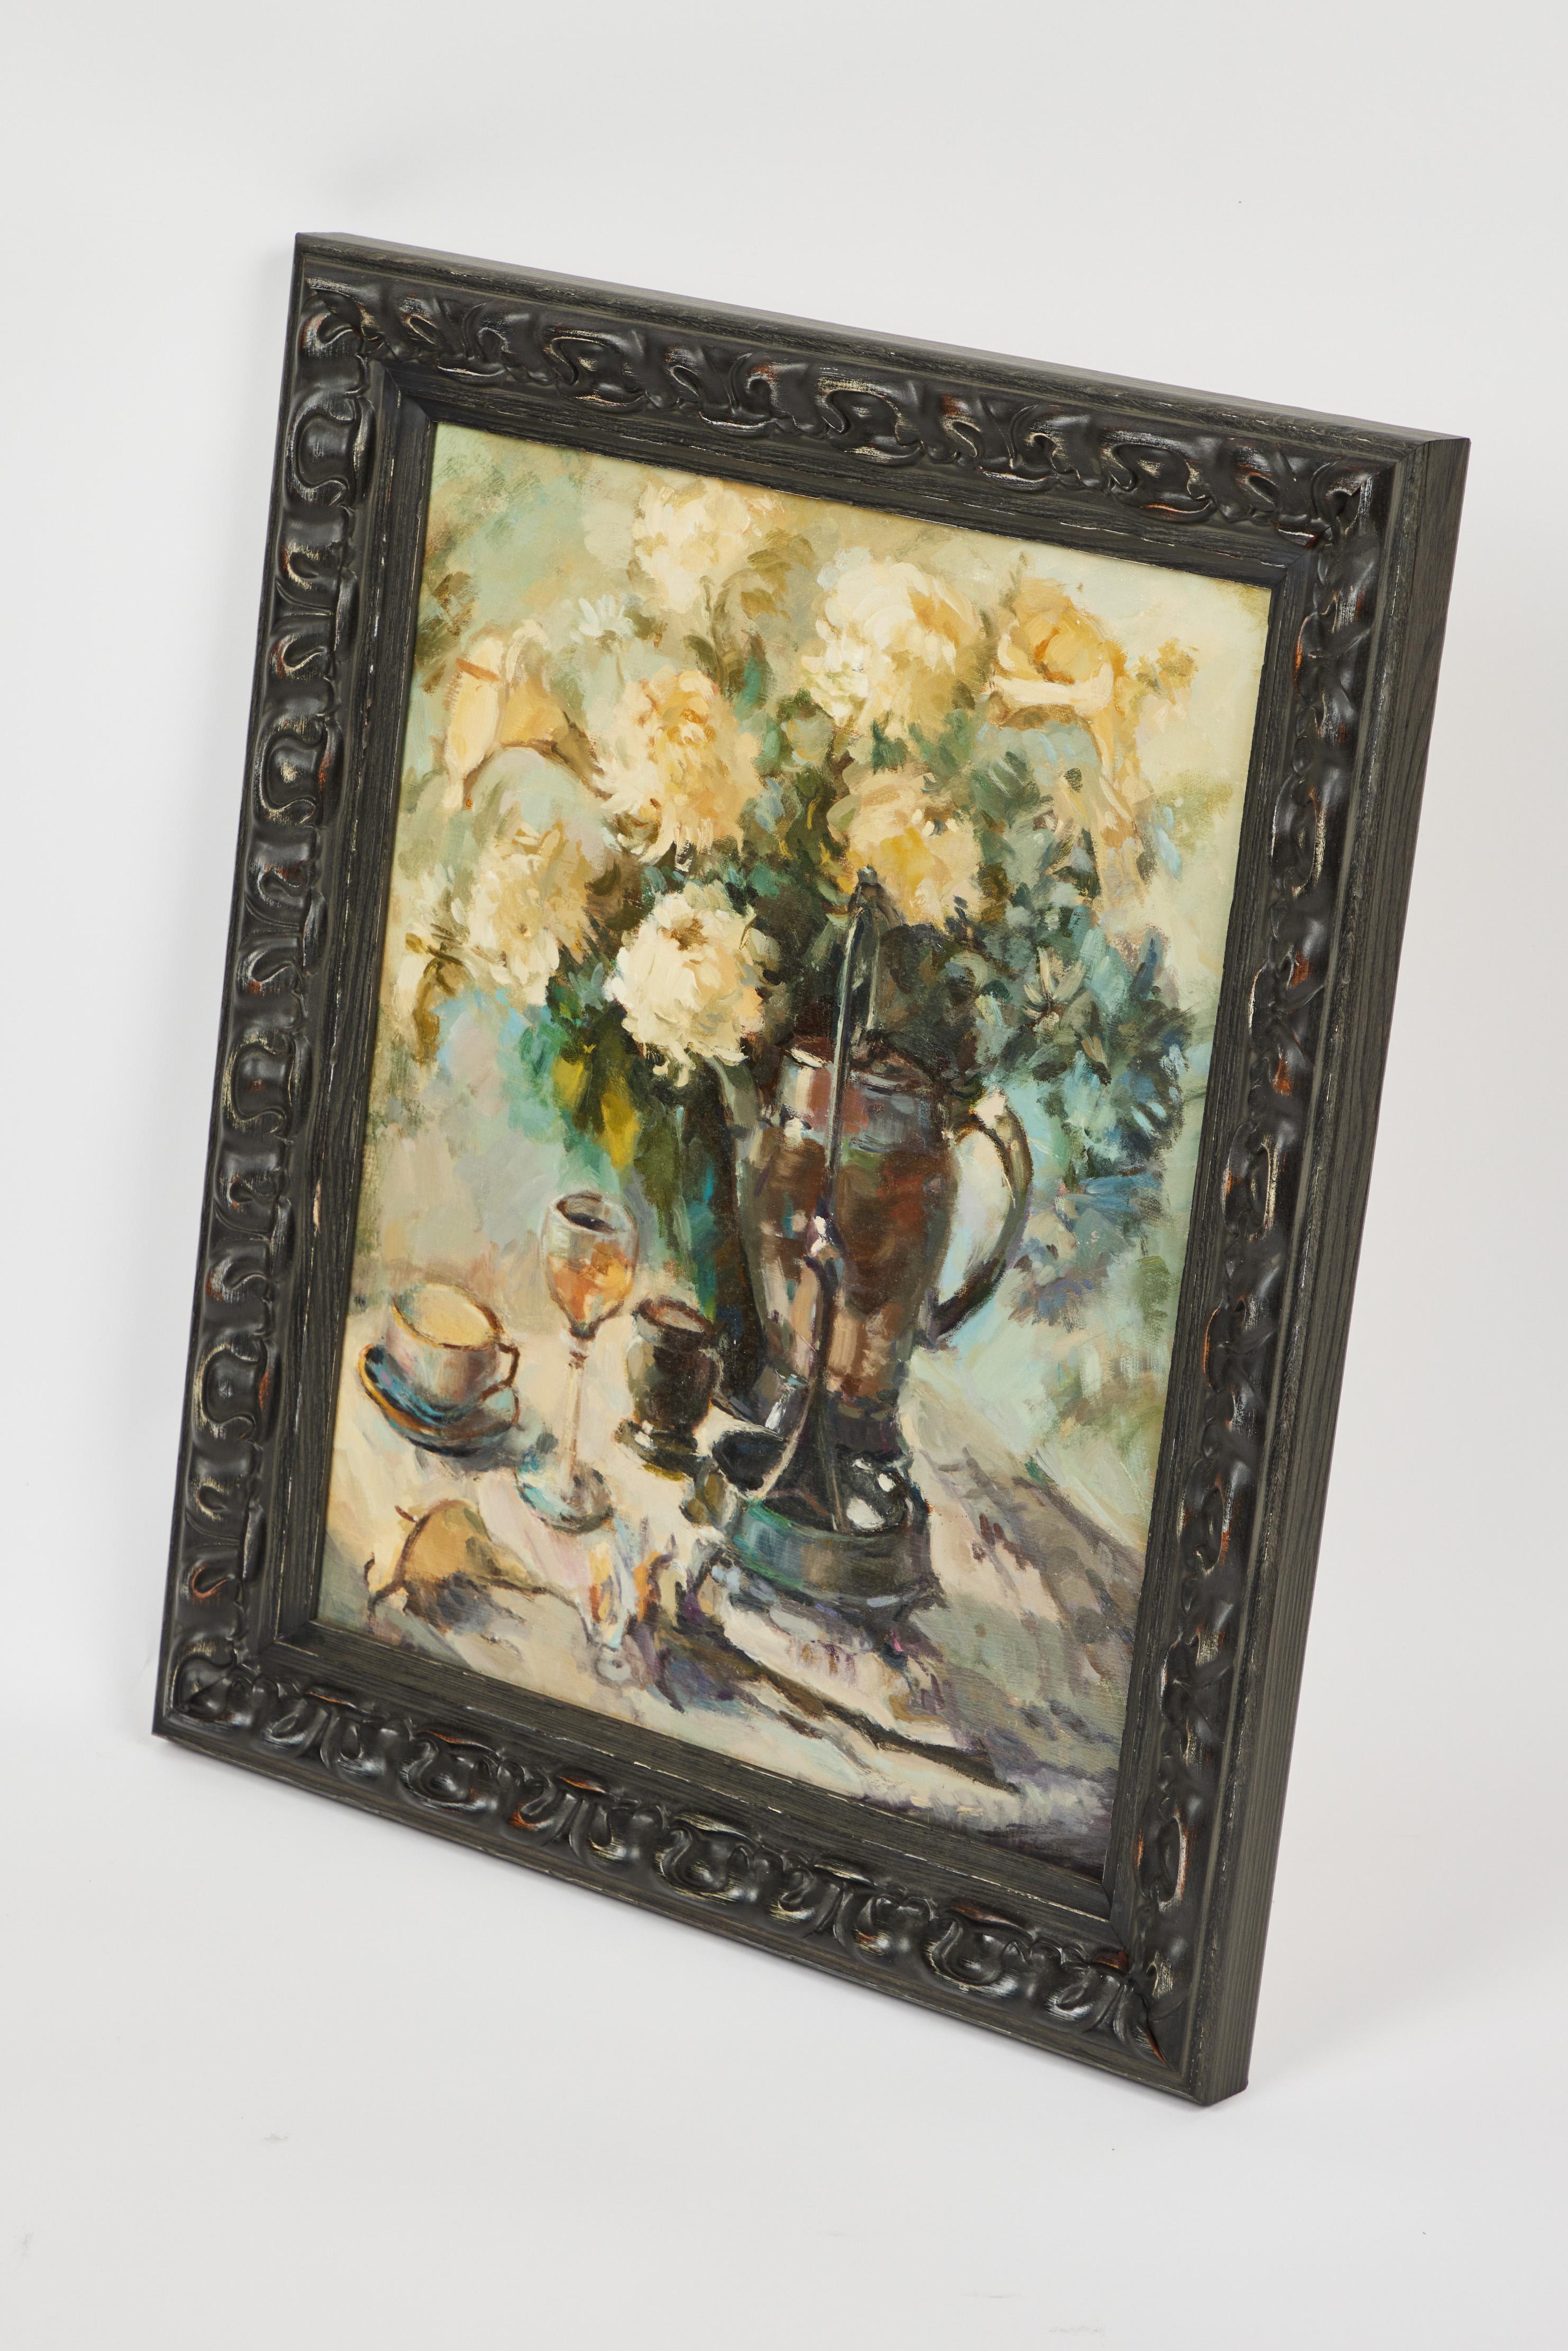 Wood Vintage Oil Painting of Floral Still Life